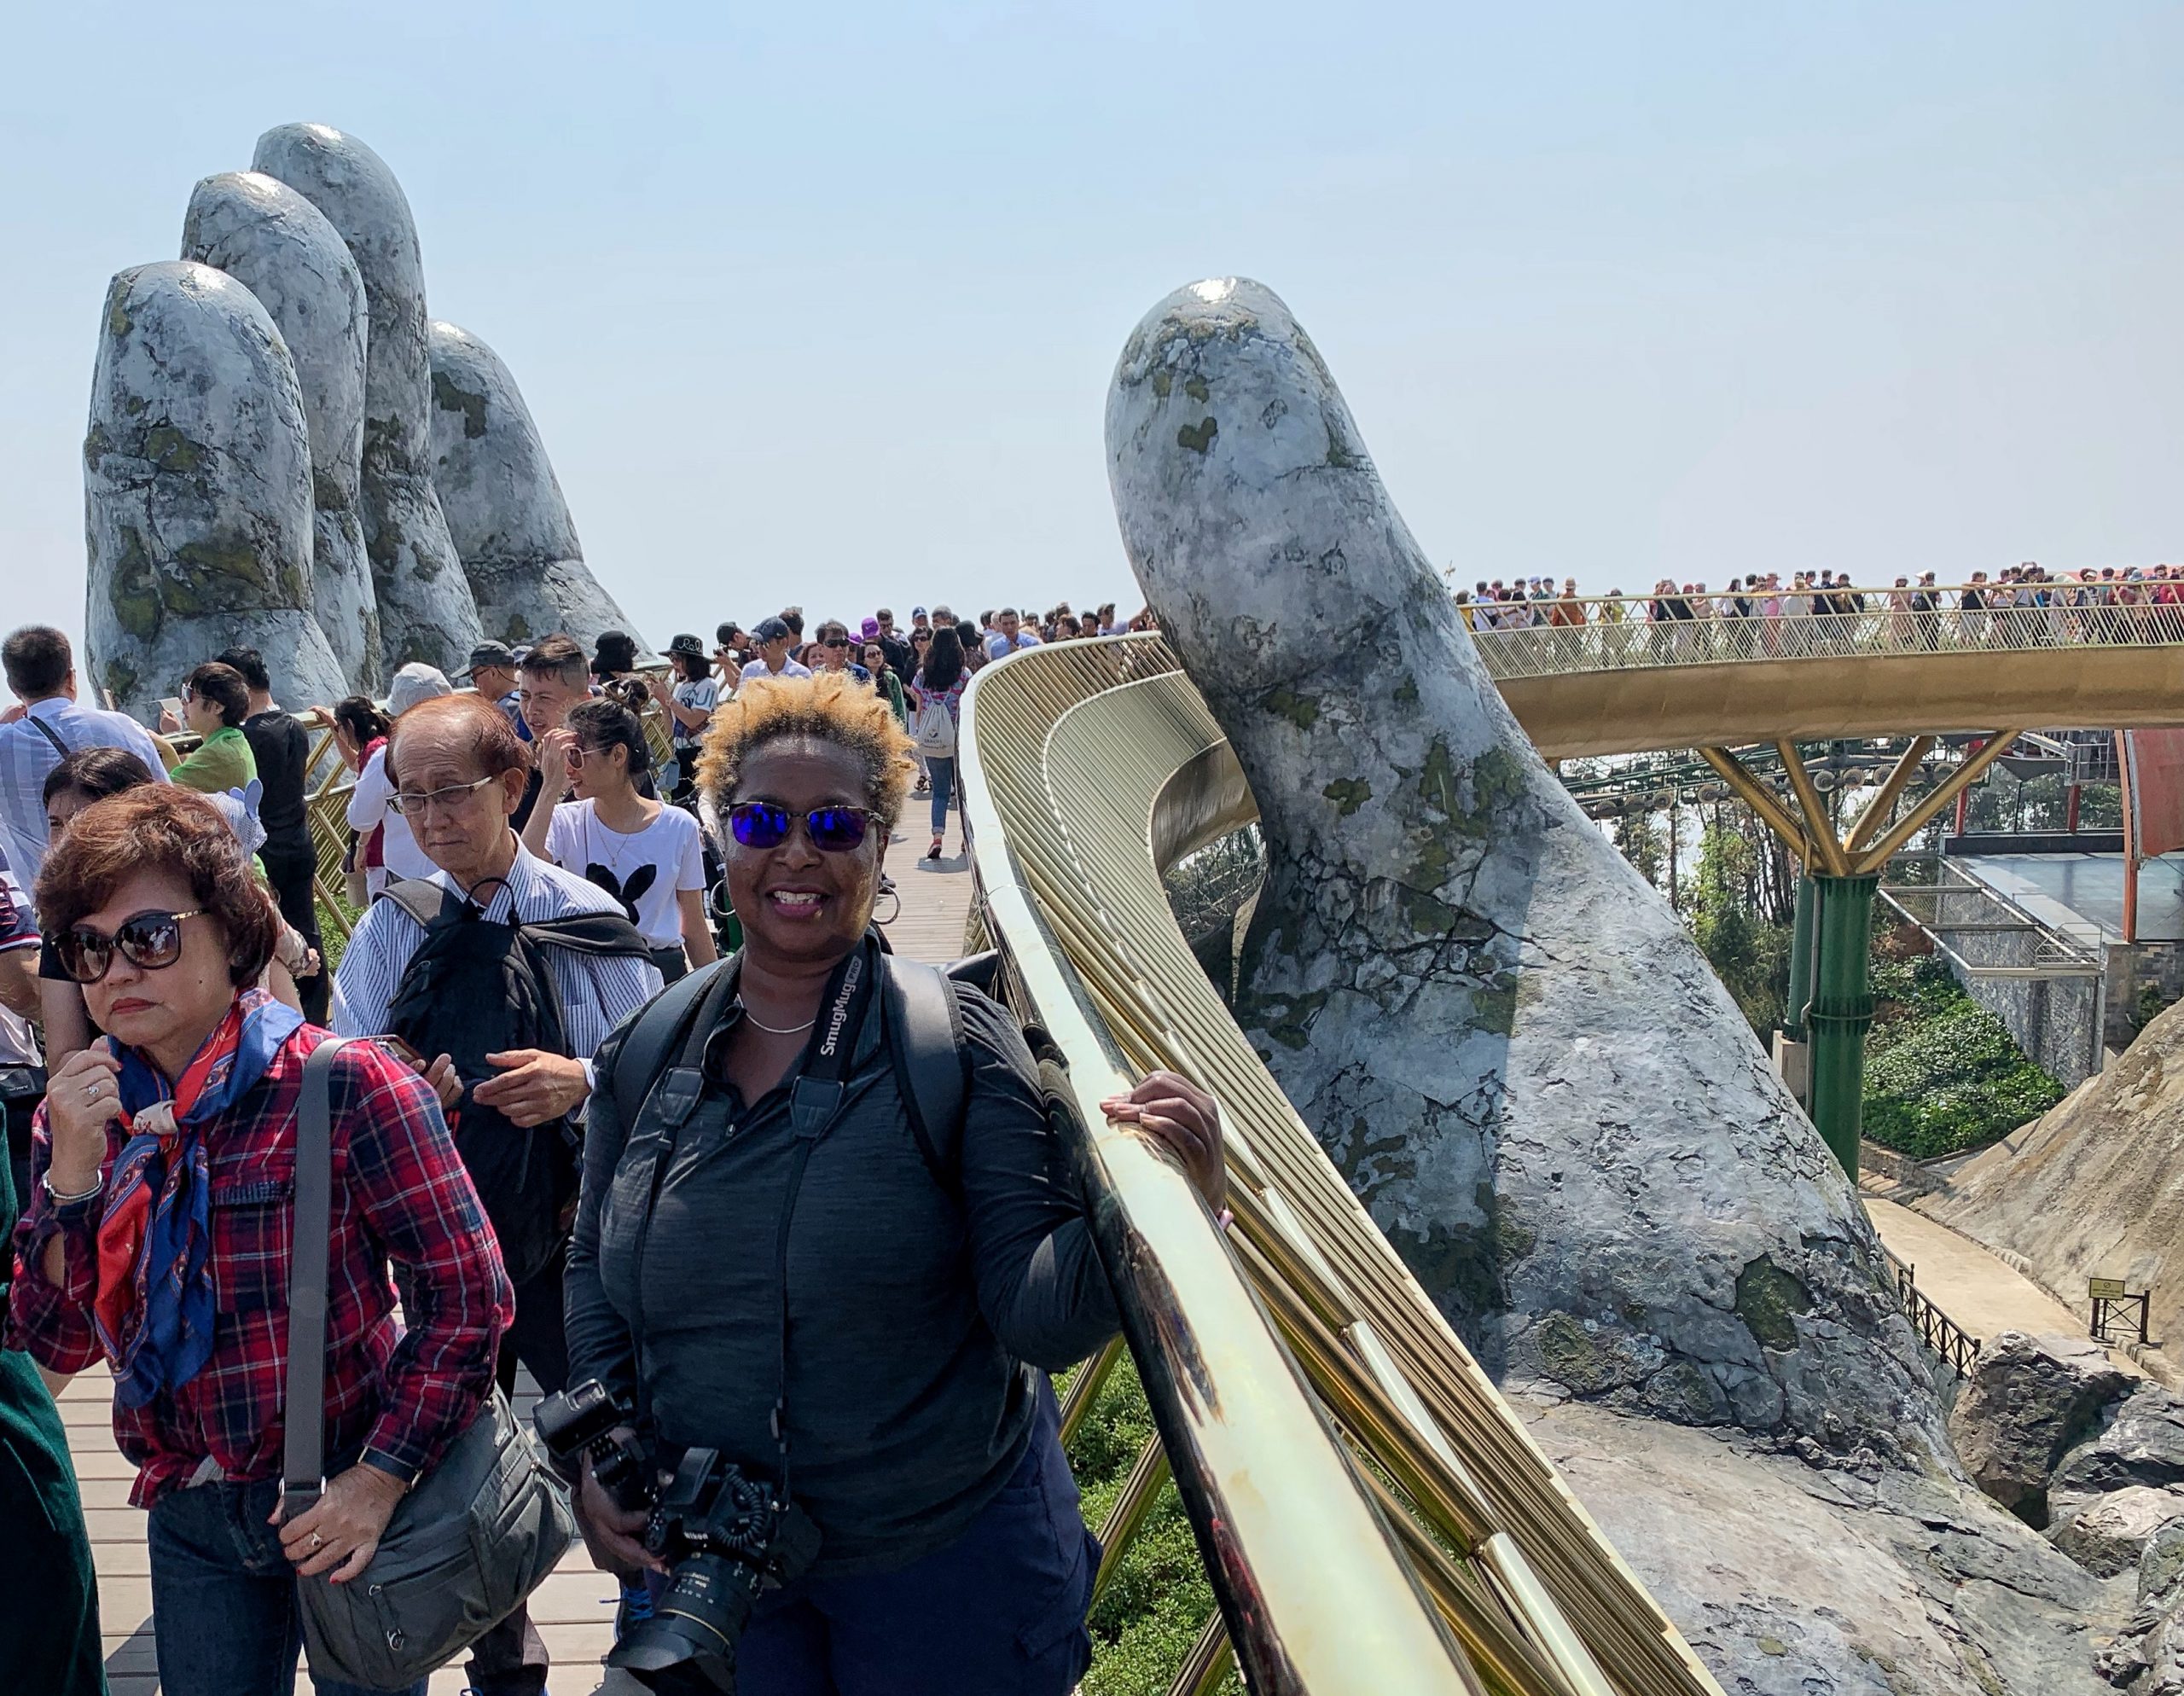 Danielle Lewis, owner of SelfishMe Travel LLC, on the "Hands of God" Golden Bridge at Sunworld's Ba Na Hills in Vietnam - image taken with an iPhone XS